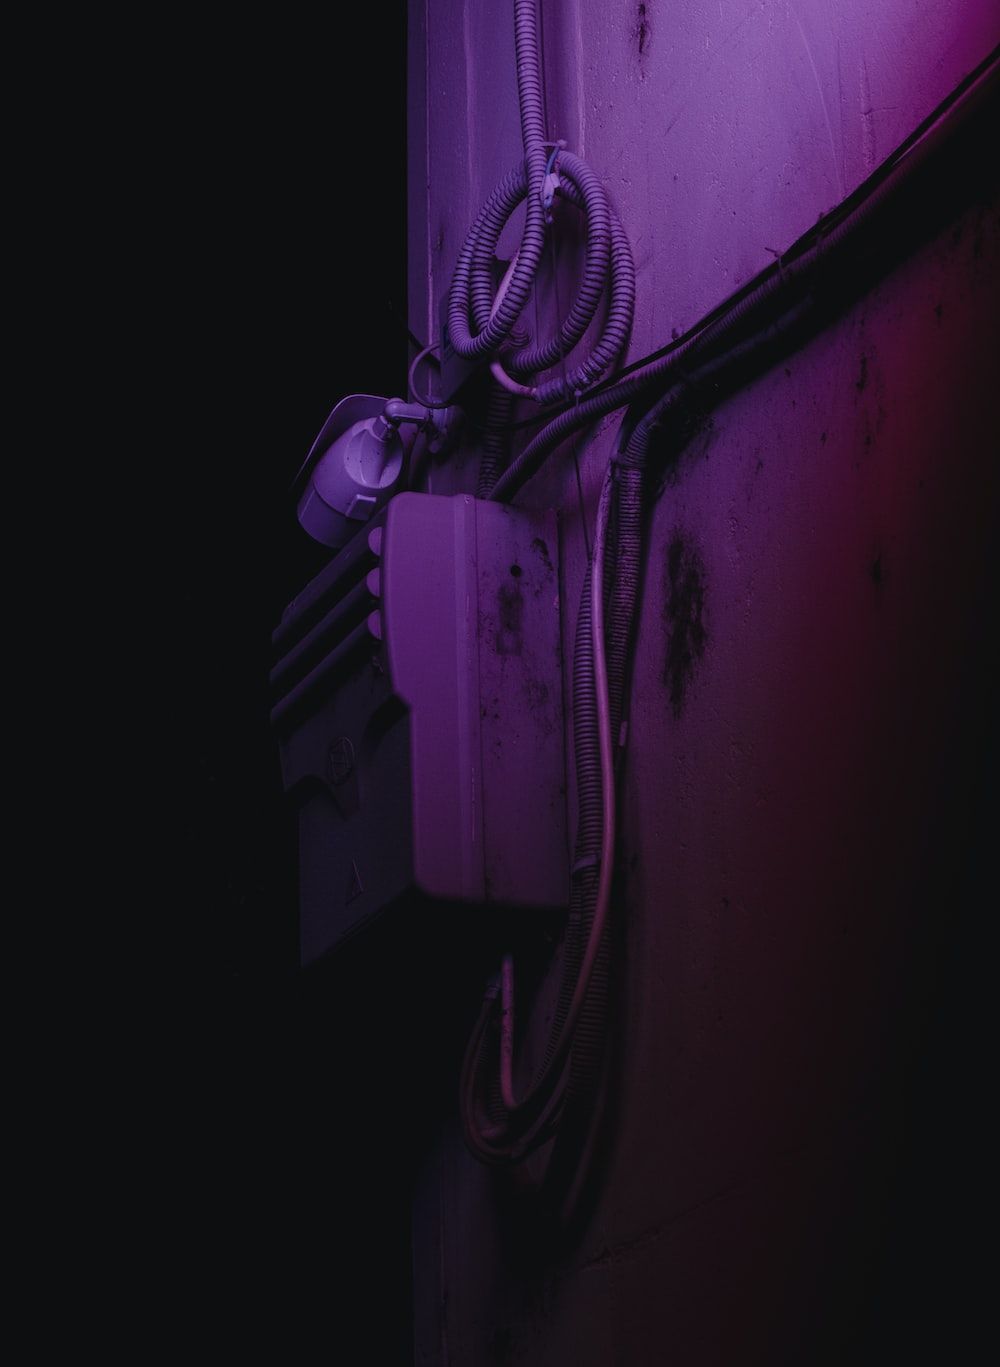 A black coated wire on white wall photo. - Dark vaporwave